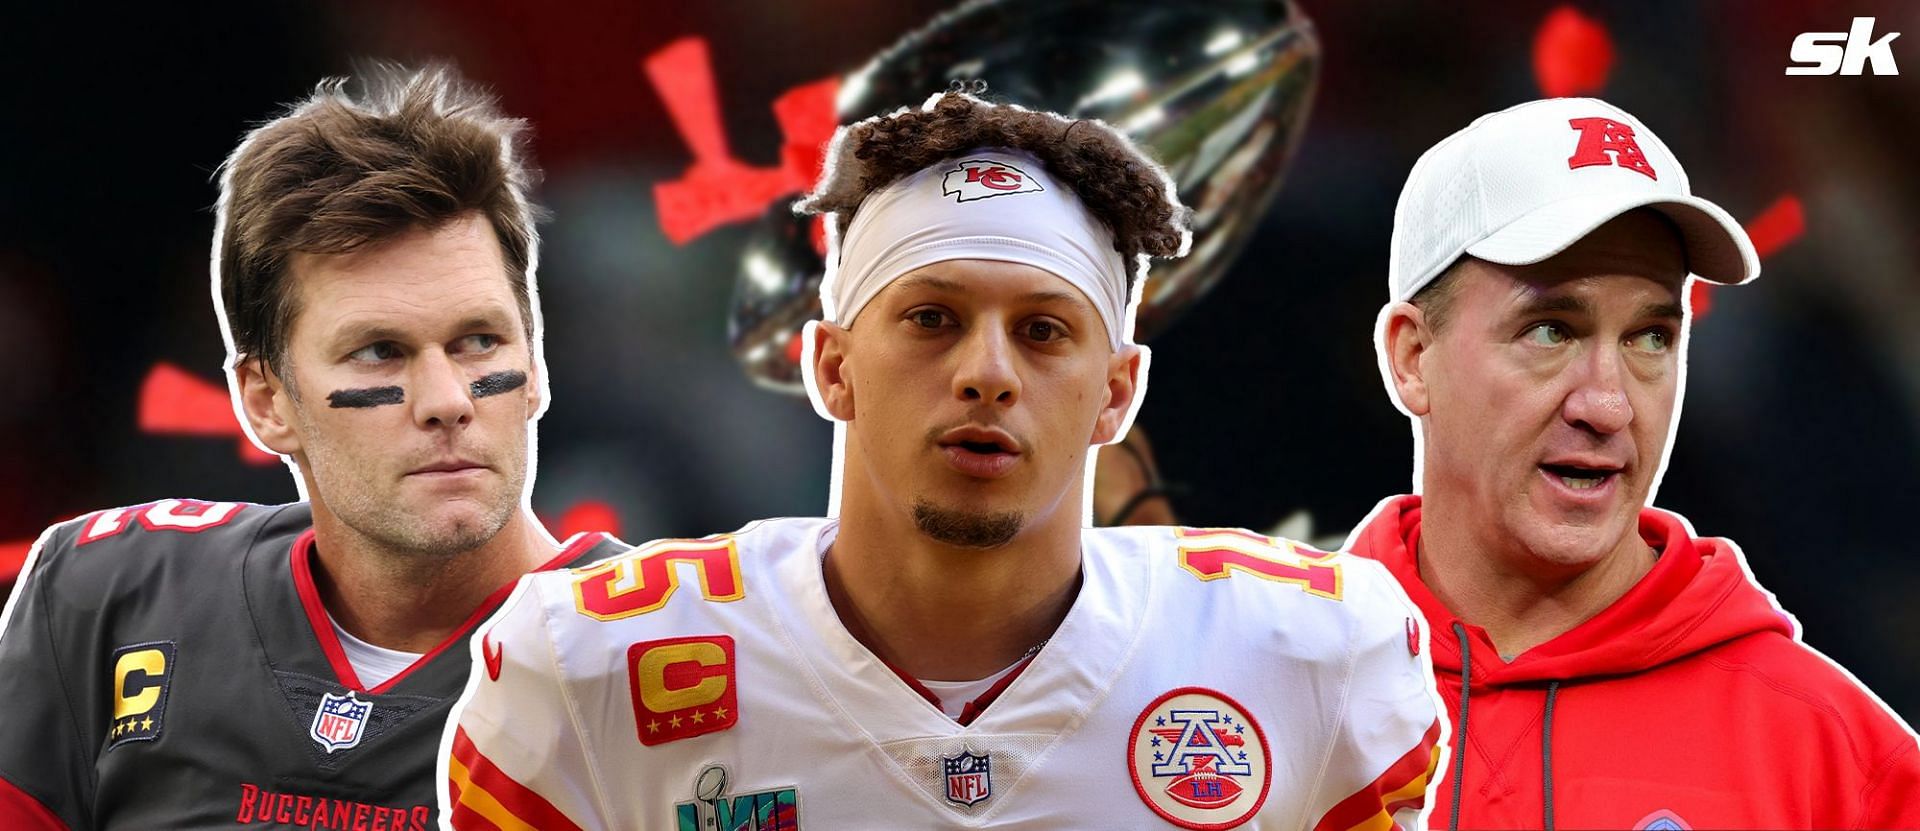 Patrick Mahomes is en route to become one of NFL